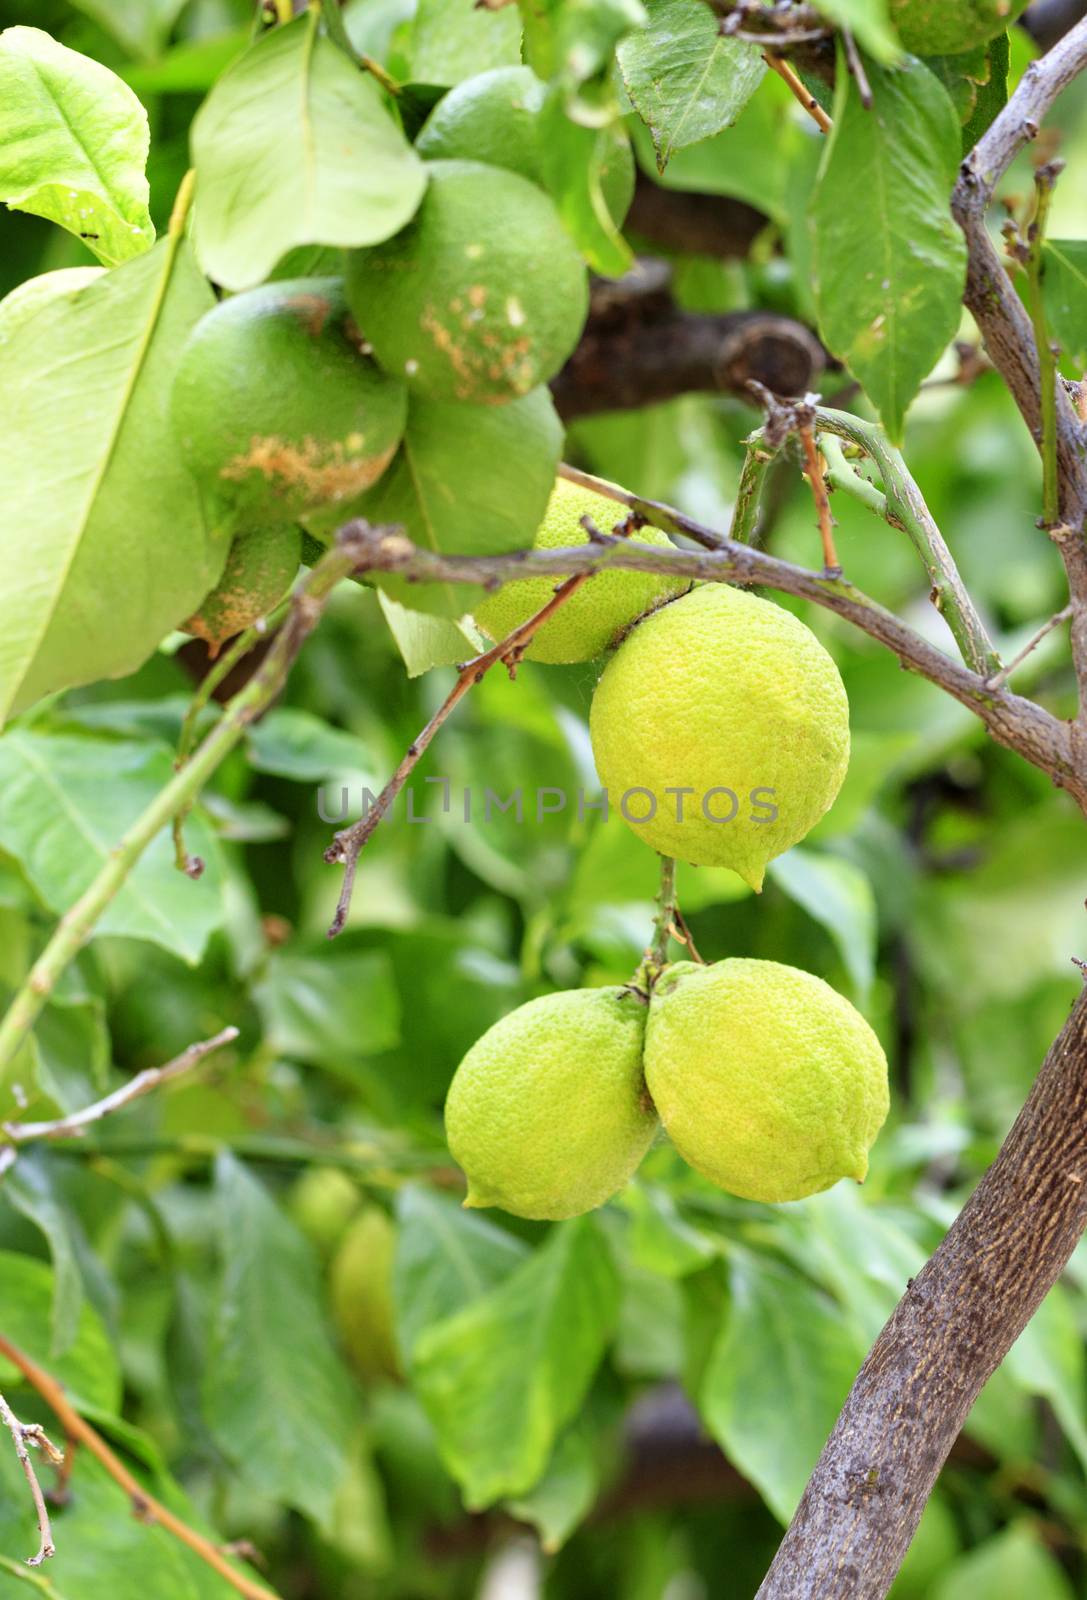 Fresh green and yellow young lemon fruits ripen on a branch against the background of lush green leaves of a tree, closeup, vertical image.